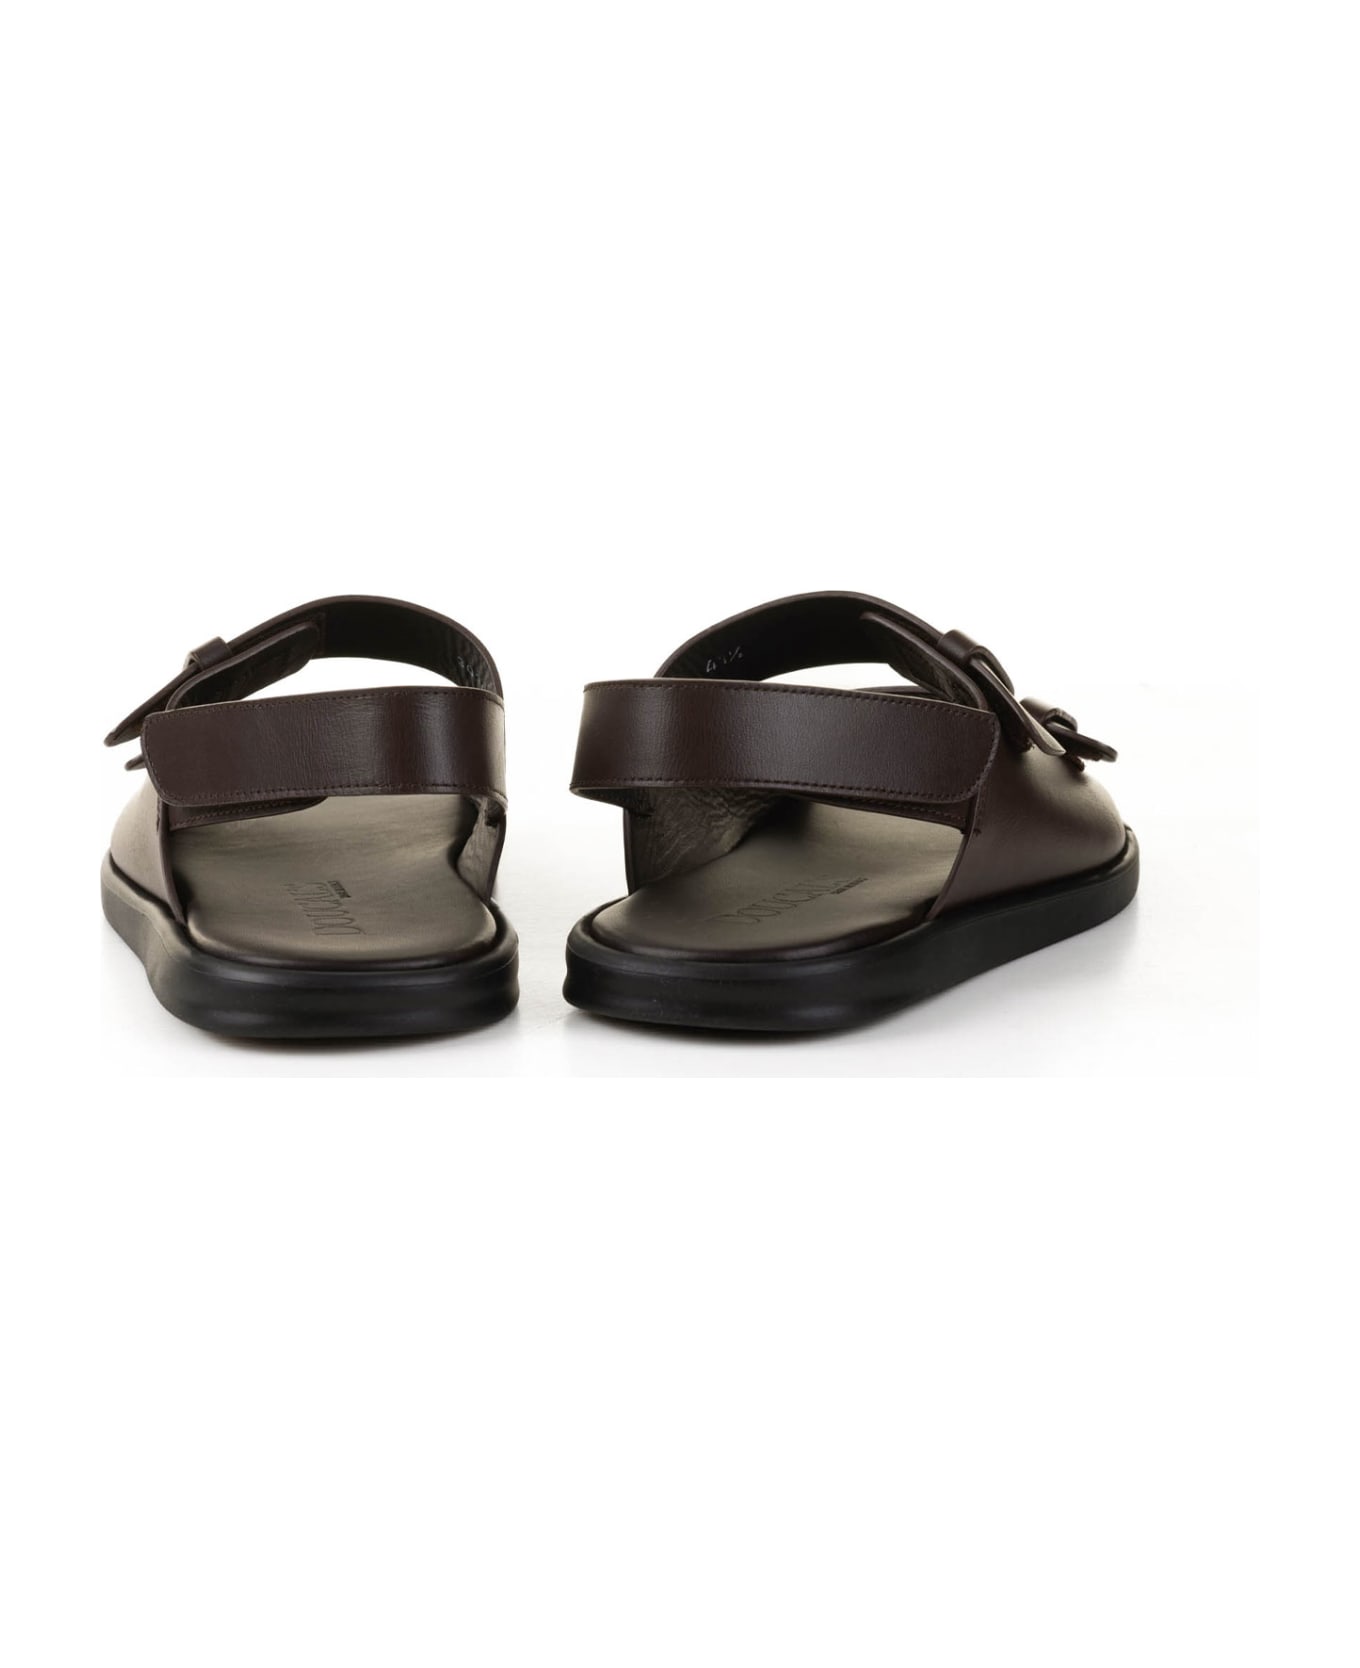 Doucal's Sandal In Dark Brown Leather And Rubber Sole - T MORO